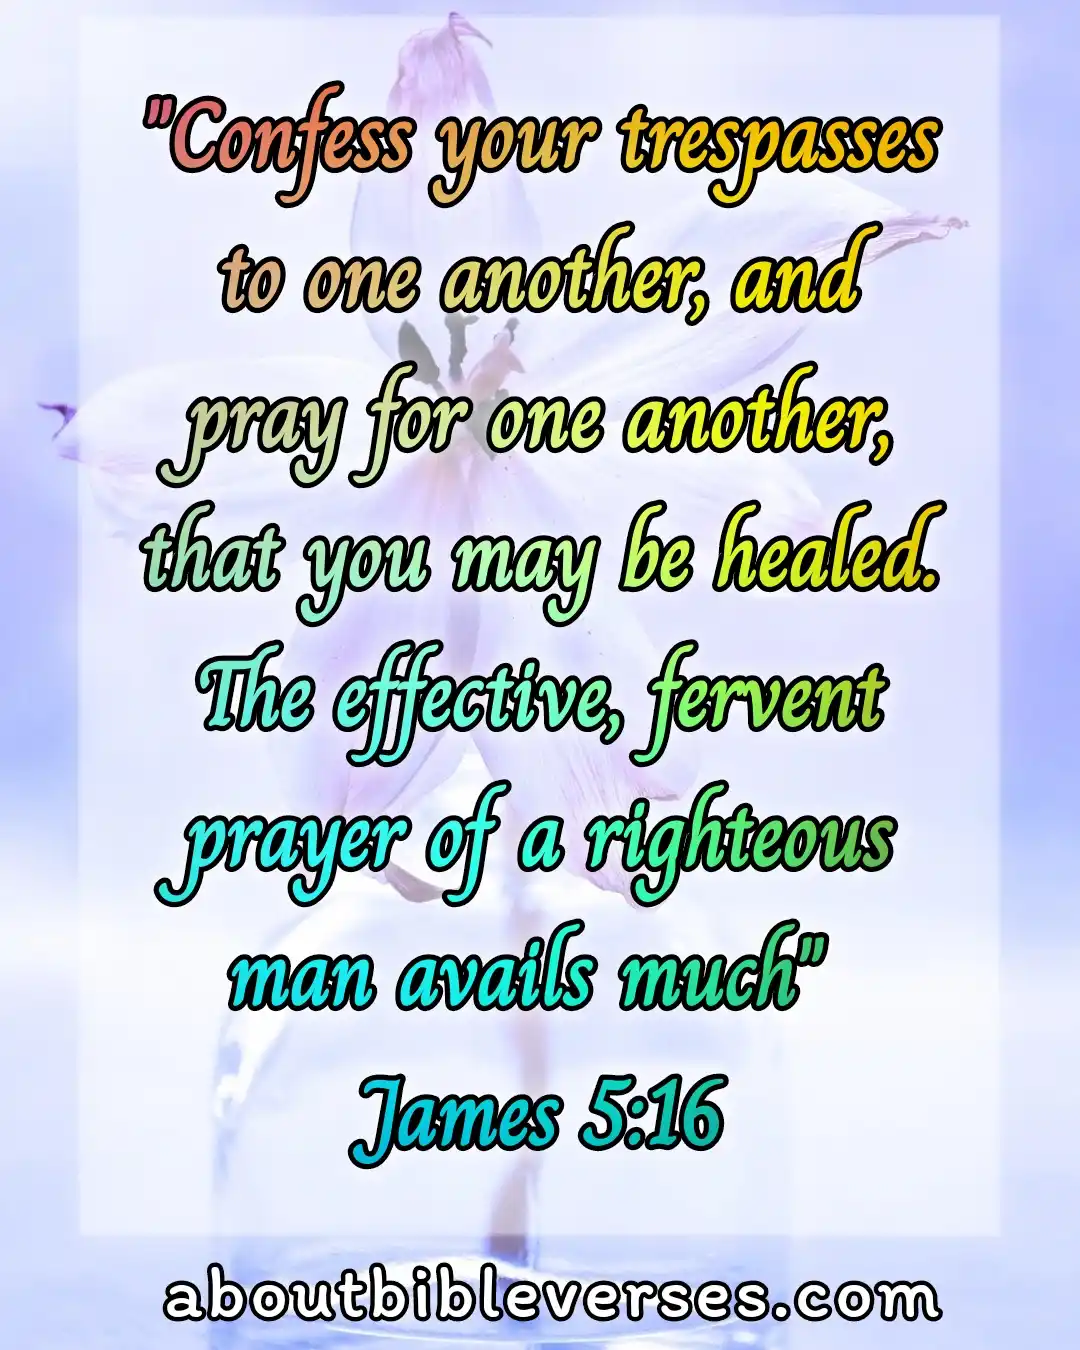 bible verses about confessing sins (James 5:16)